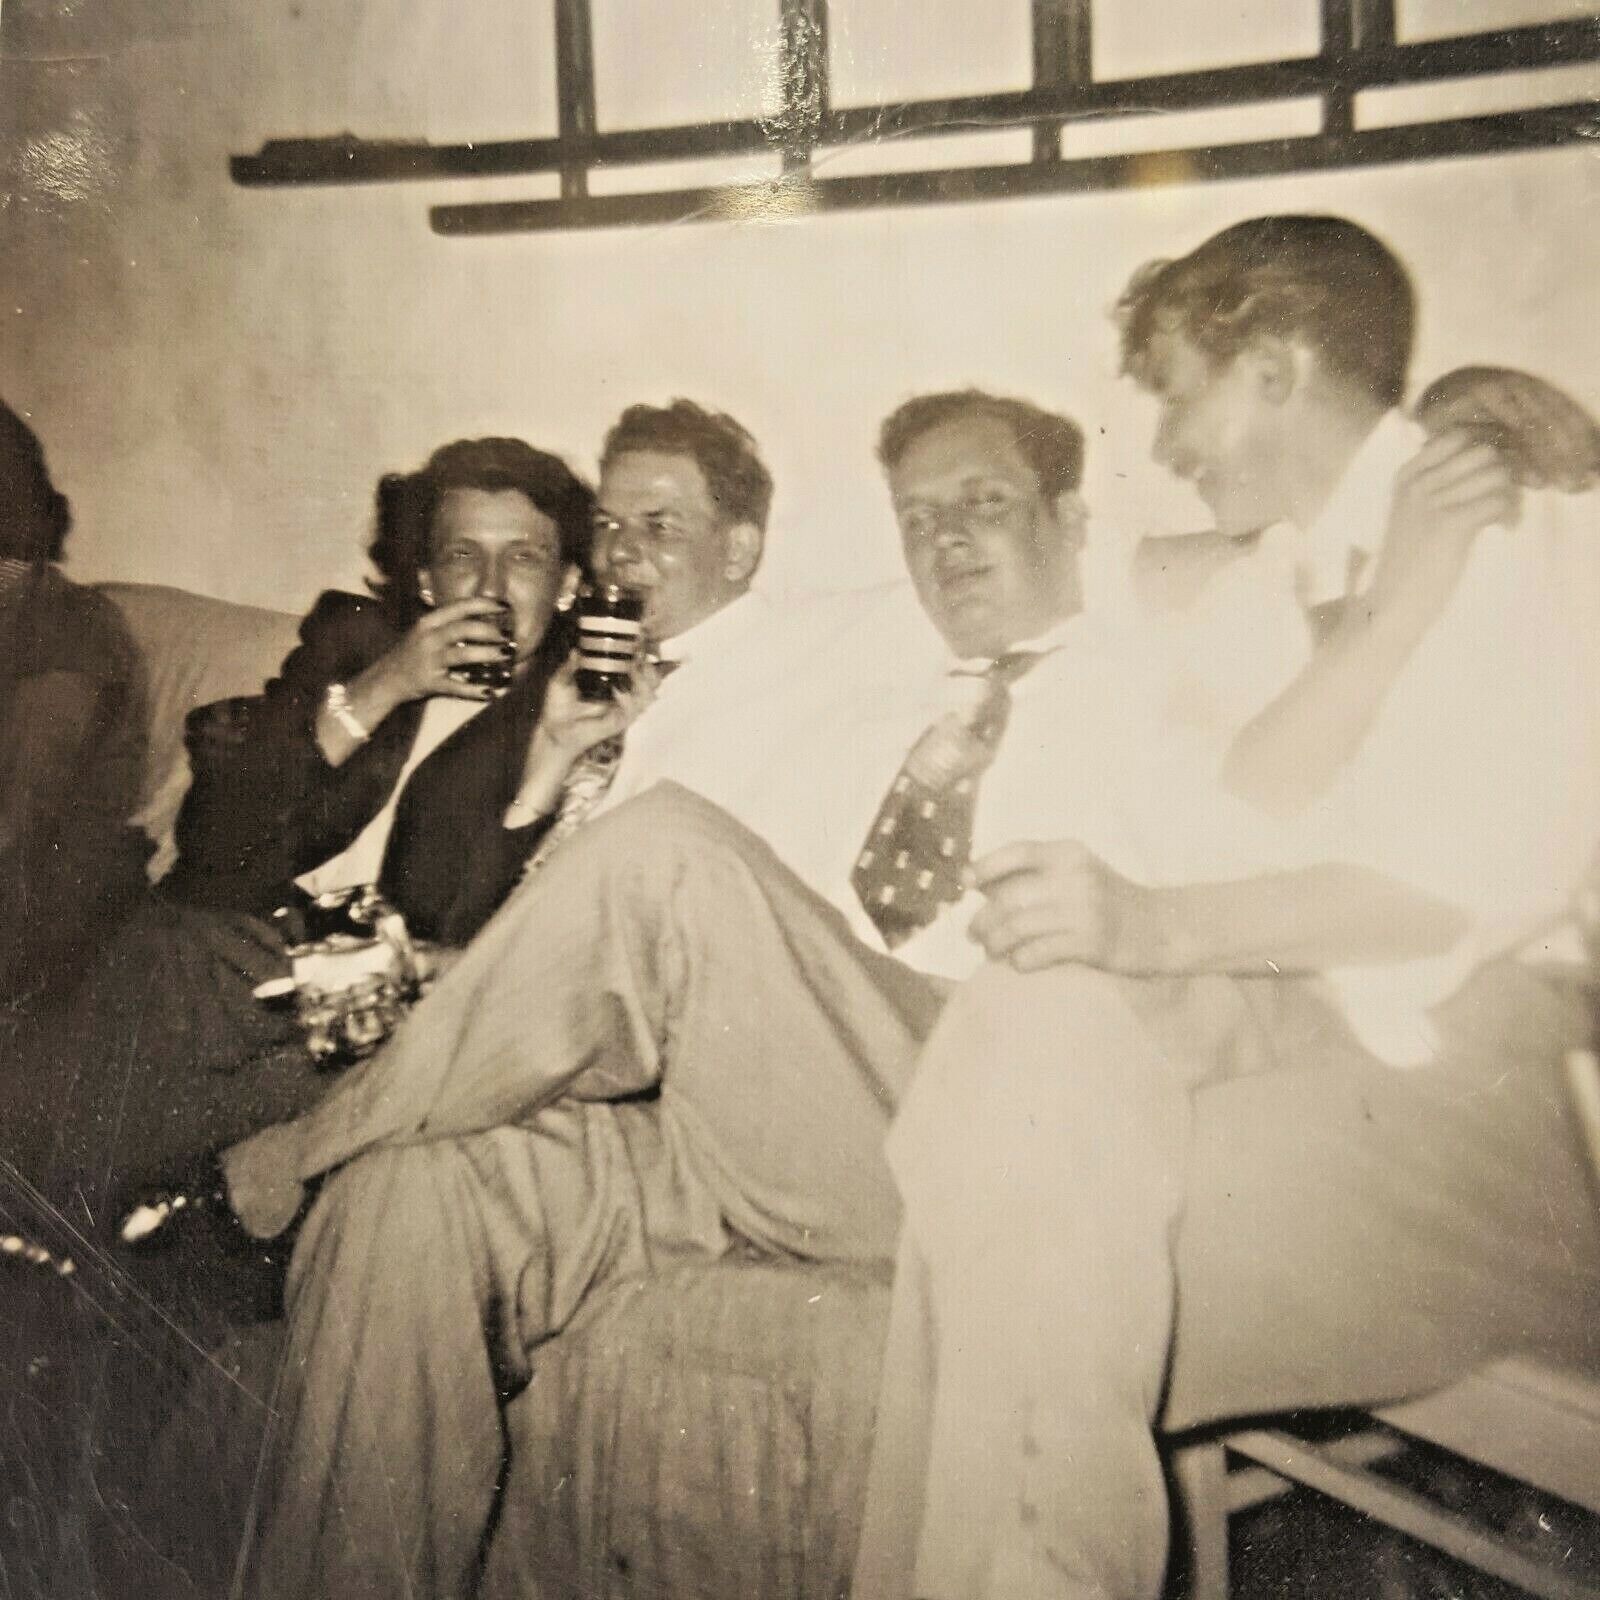 Vintage B&W Photo Men and Woman Drinking at Risqué Cocktail Party 